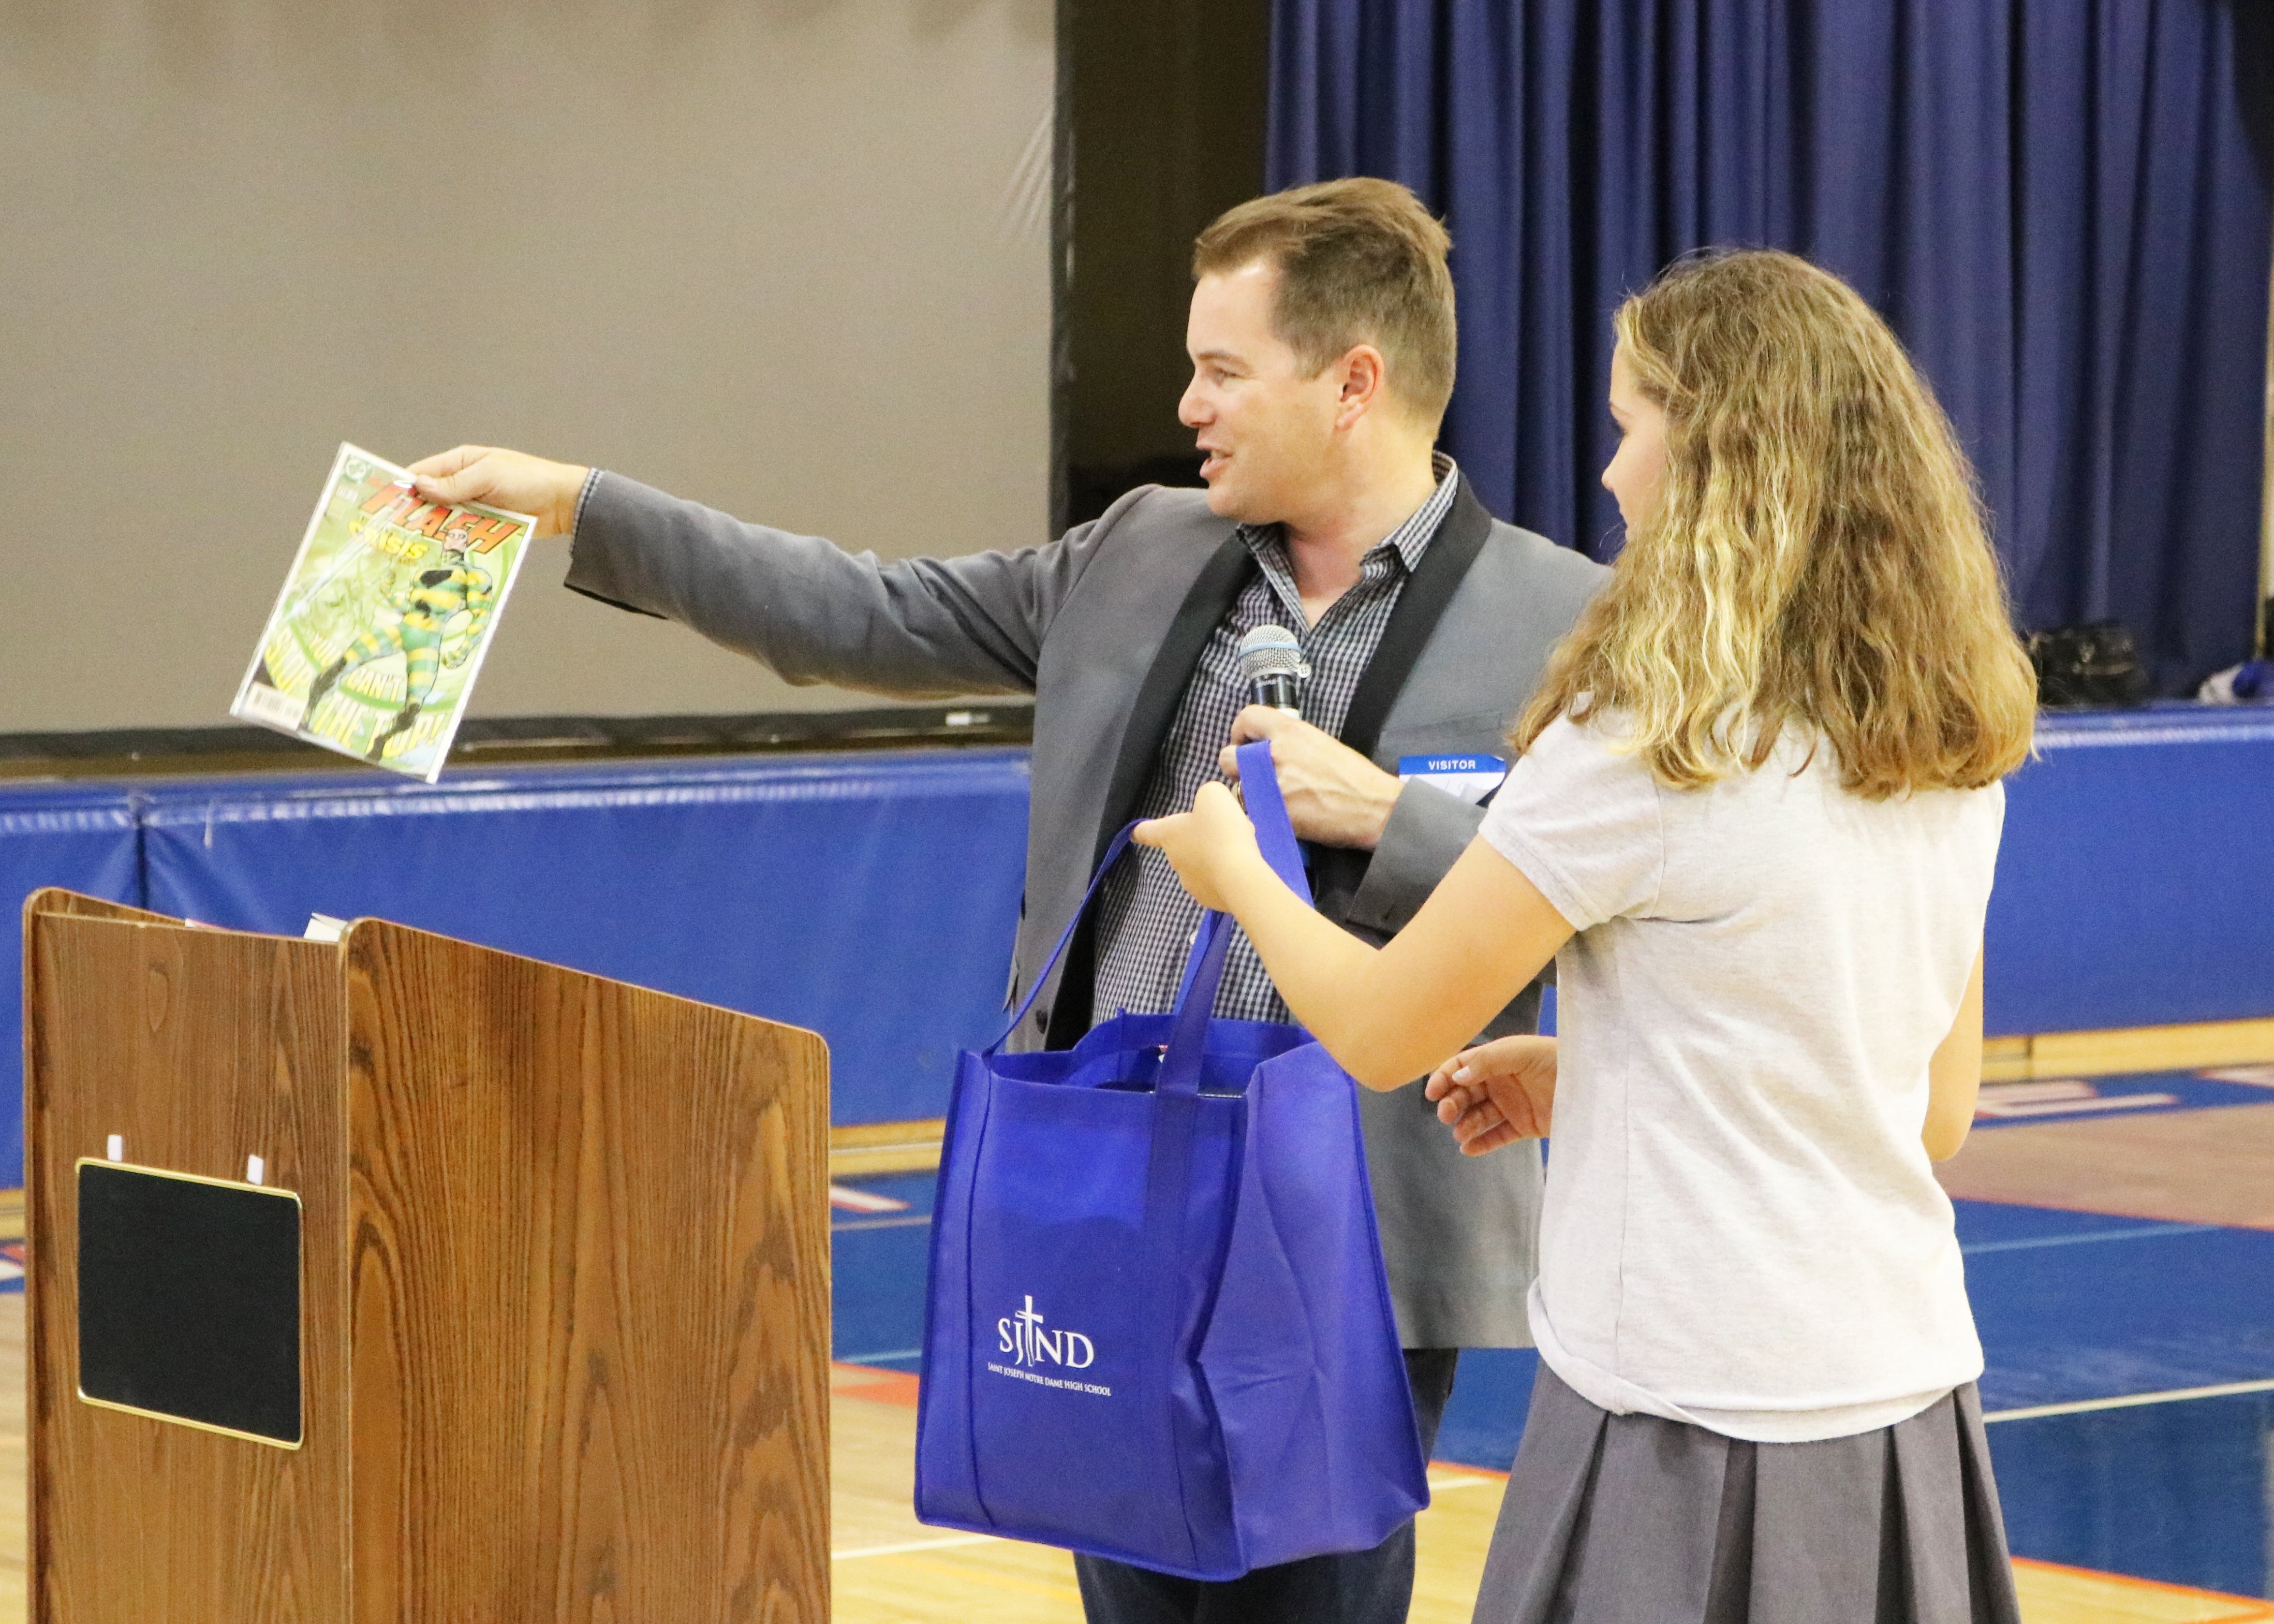 To thank Stentz for his talk, SJND students presented him with a gift which included SJND gear and a ‘The Flash’ comic book.